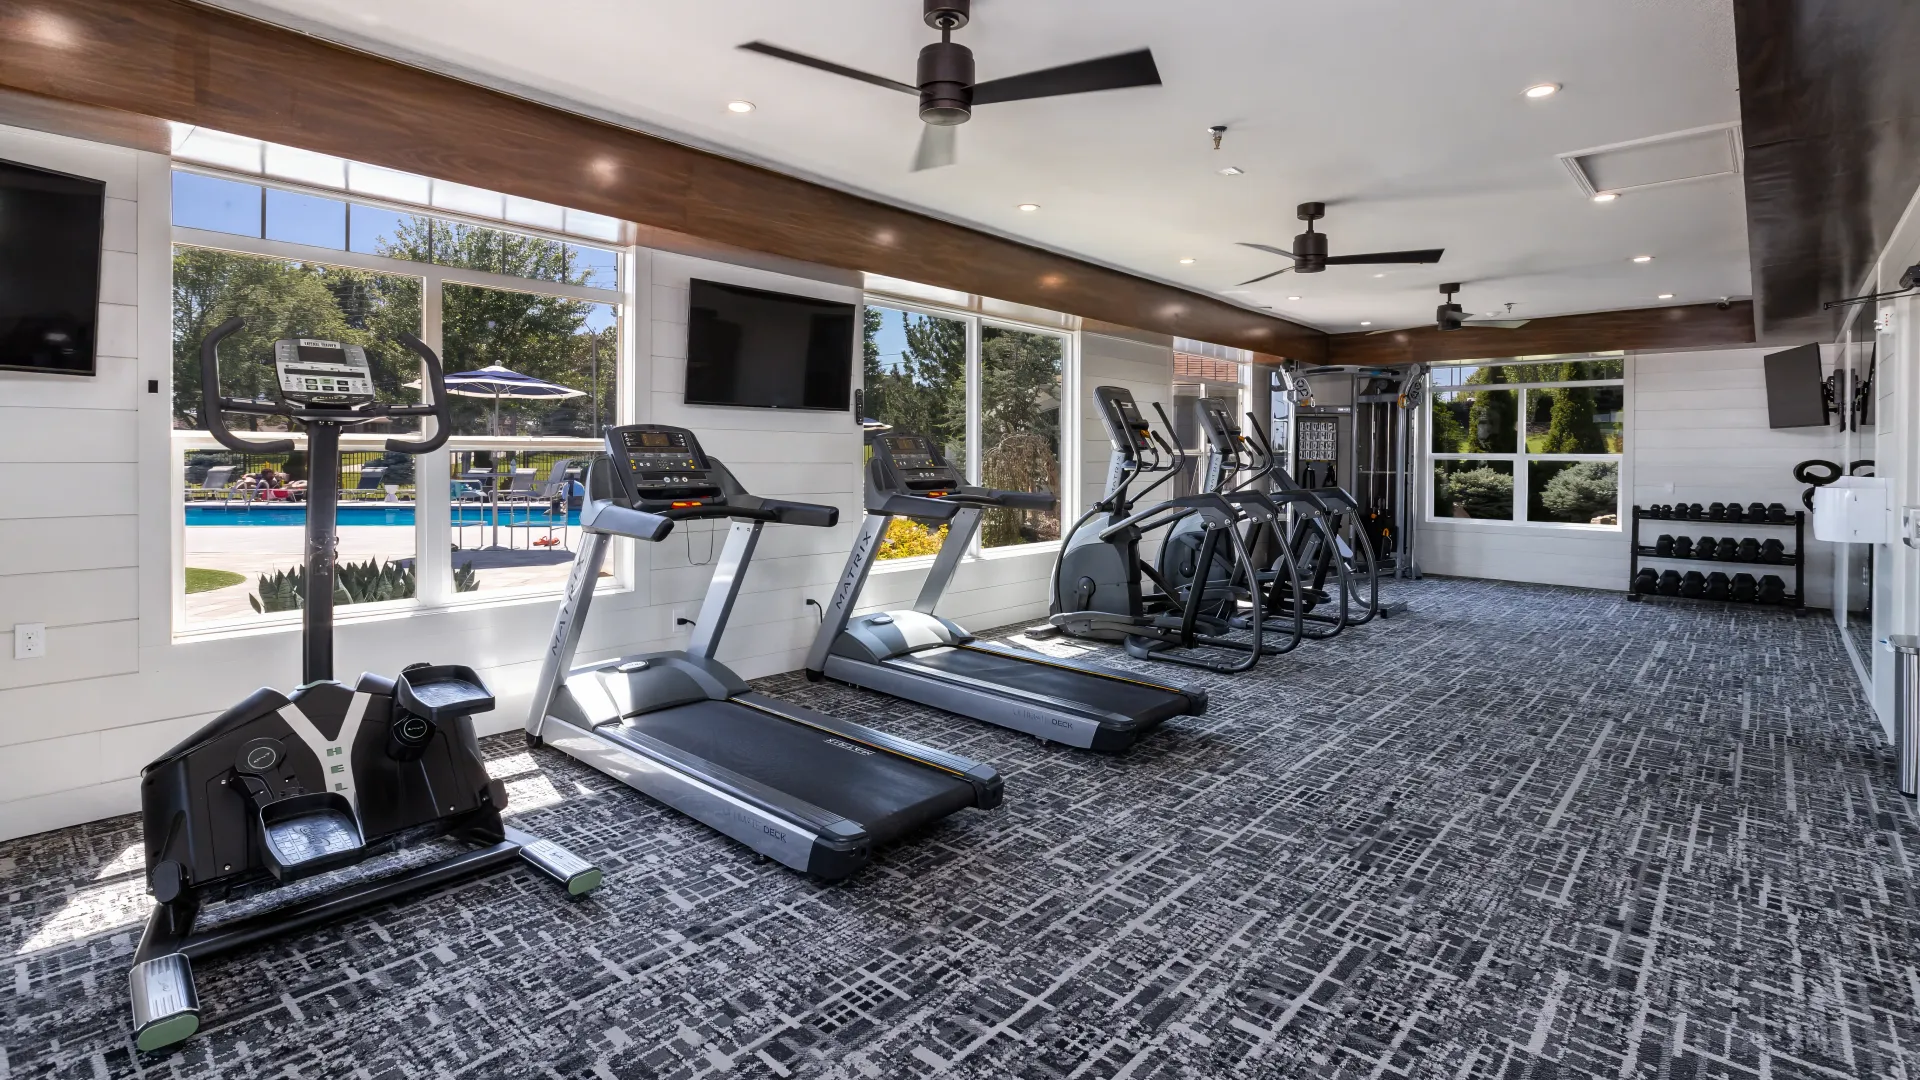 Interior of a fitness center at Lenox West featuring treadmills, ellipticals, and a pool view through large windows.